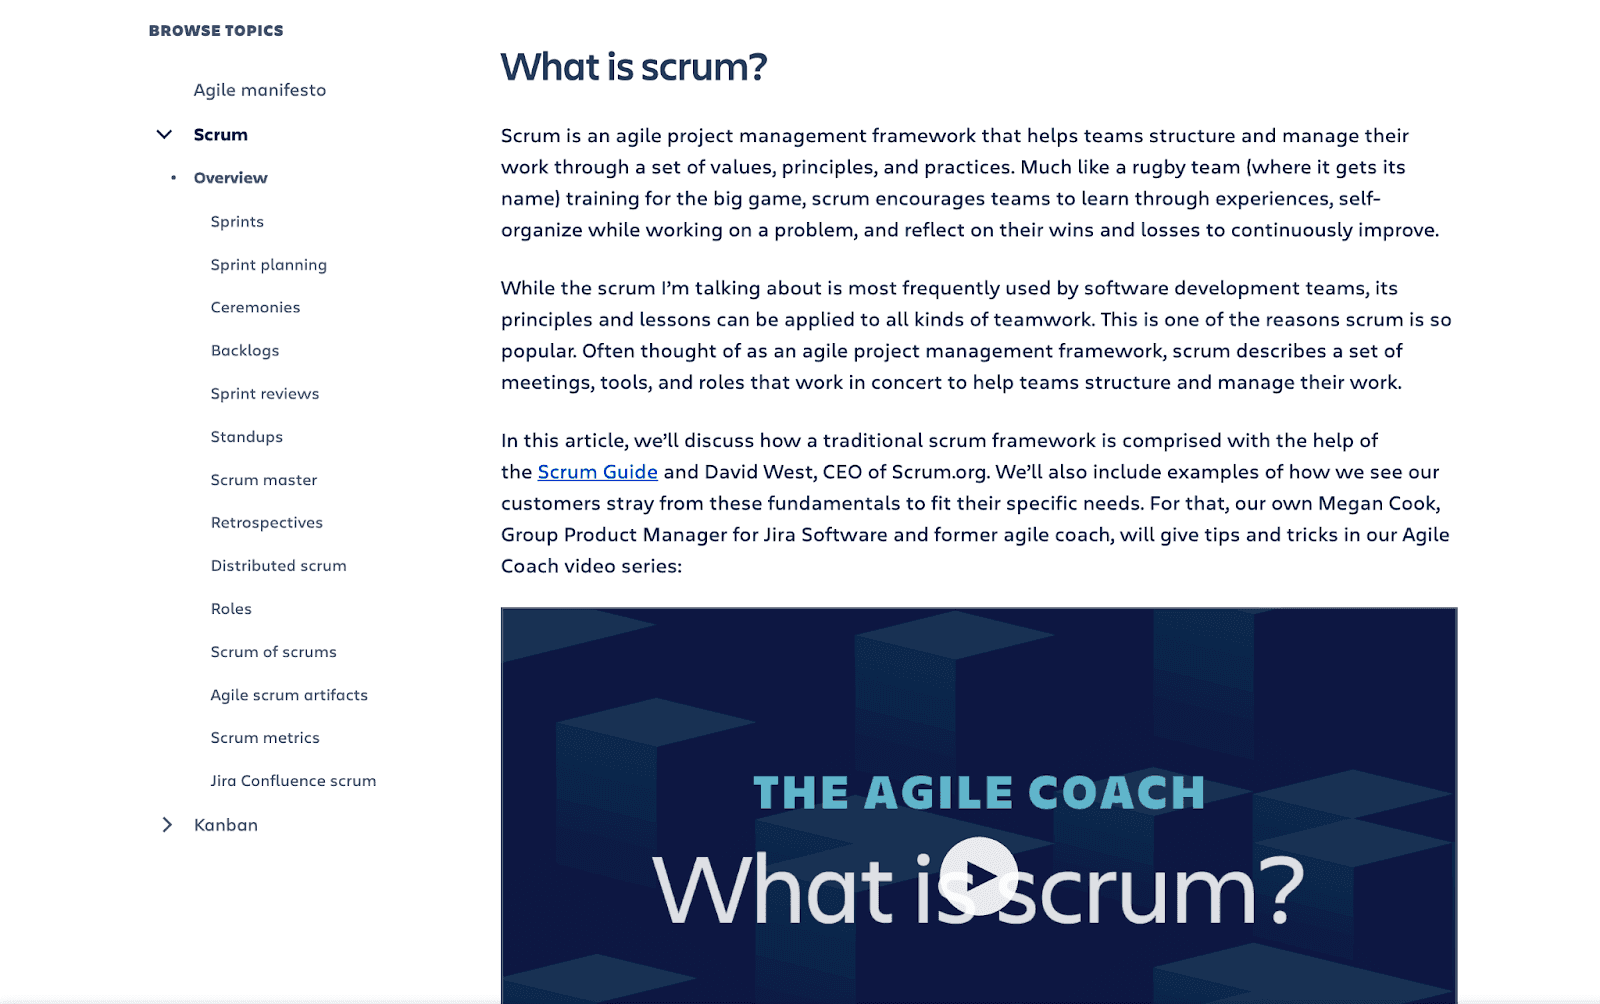 Atlassian describes what scrum is, which shortened is an agile project management framework that helps teams structure and manage their work.